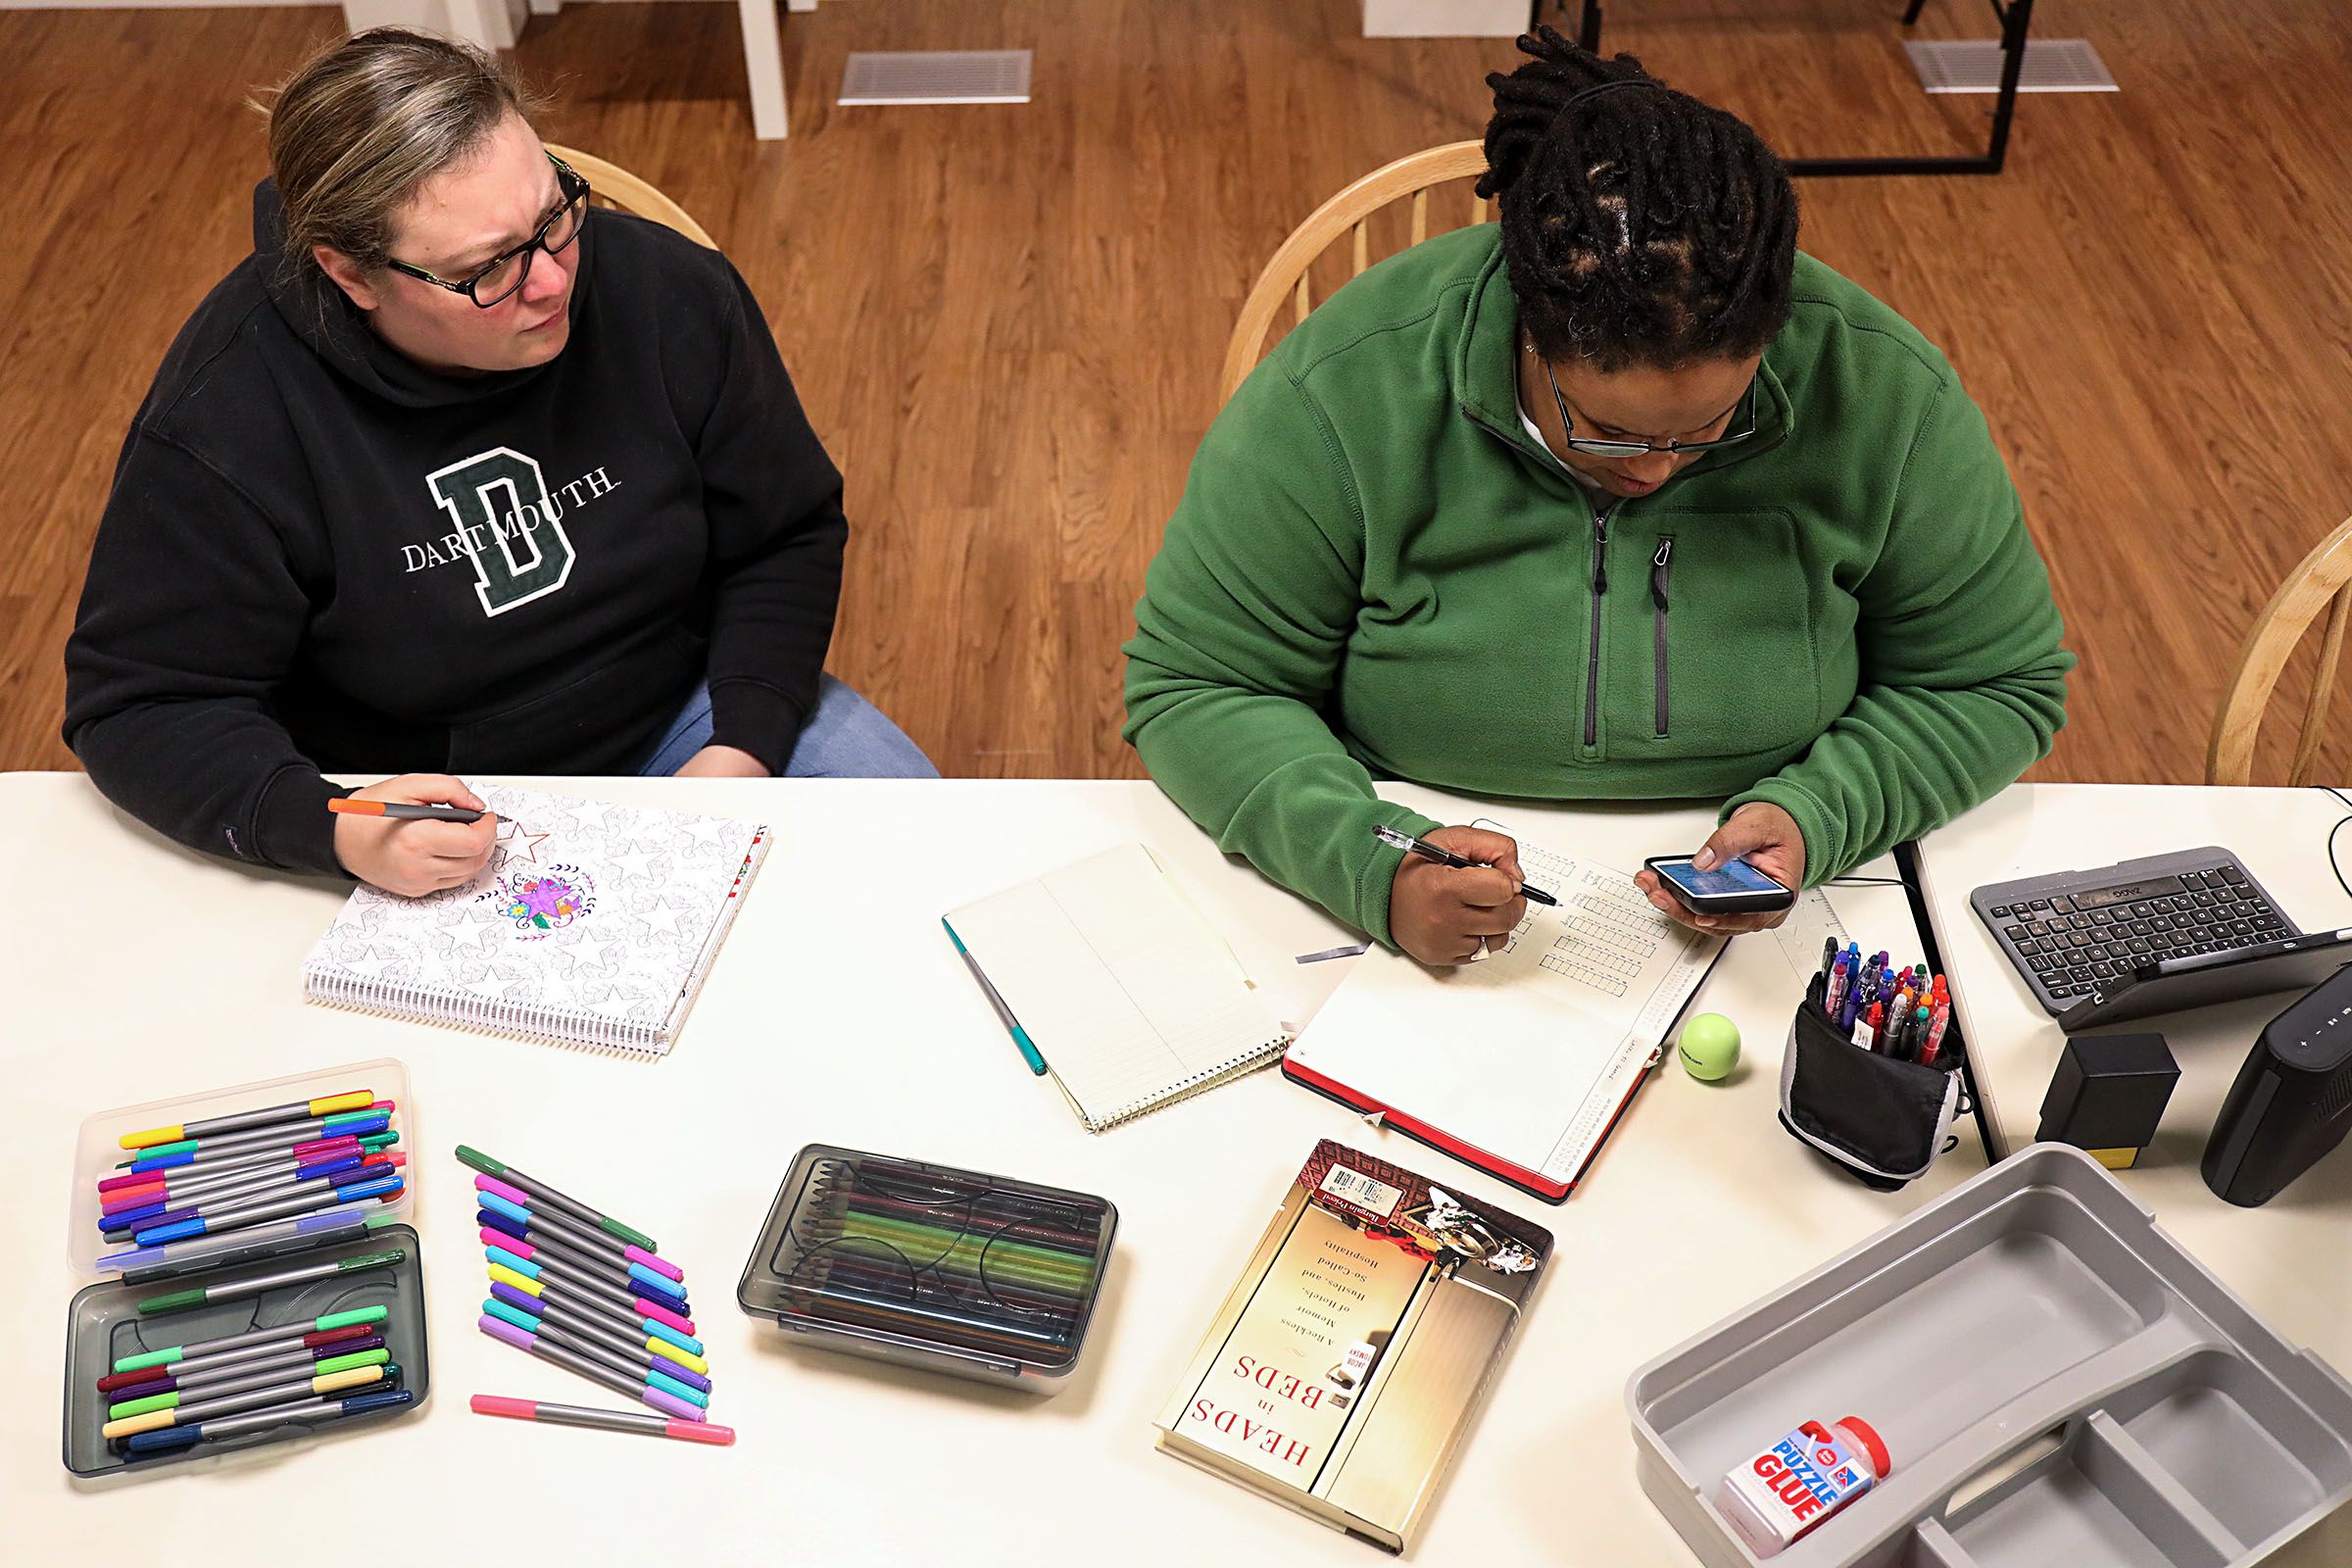 Jen Jones, left, of Hanover, N.H., draws in a coloring book as her wife, Dia Draper, also of Hanover, works on a bullet journal on Monday, Oct. 23, 2017, in the common area at the Triangle House on the Dartmouth College campus in Hanover, N.H. The couple live at the Triangle House as live-in advisors for LGBTQIA+ students living on campus. (Valley News - Charles Hatcher) Copyright Valley News. May not be reprinted or used online without permission. Send requests to permission@vnews.com